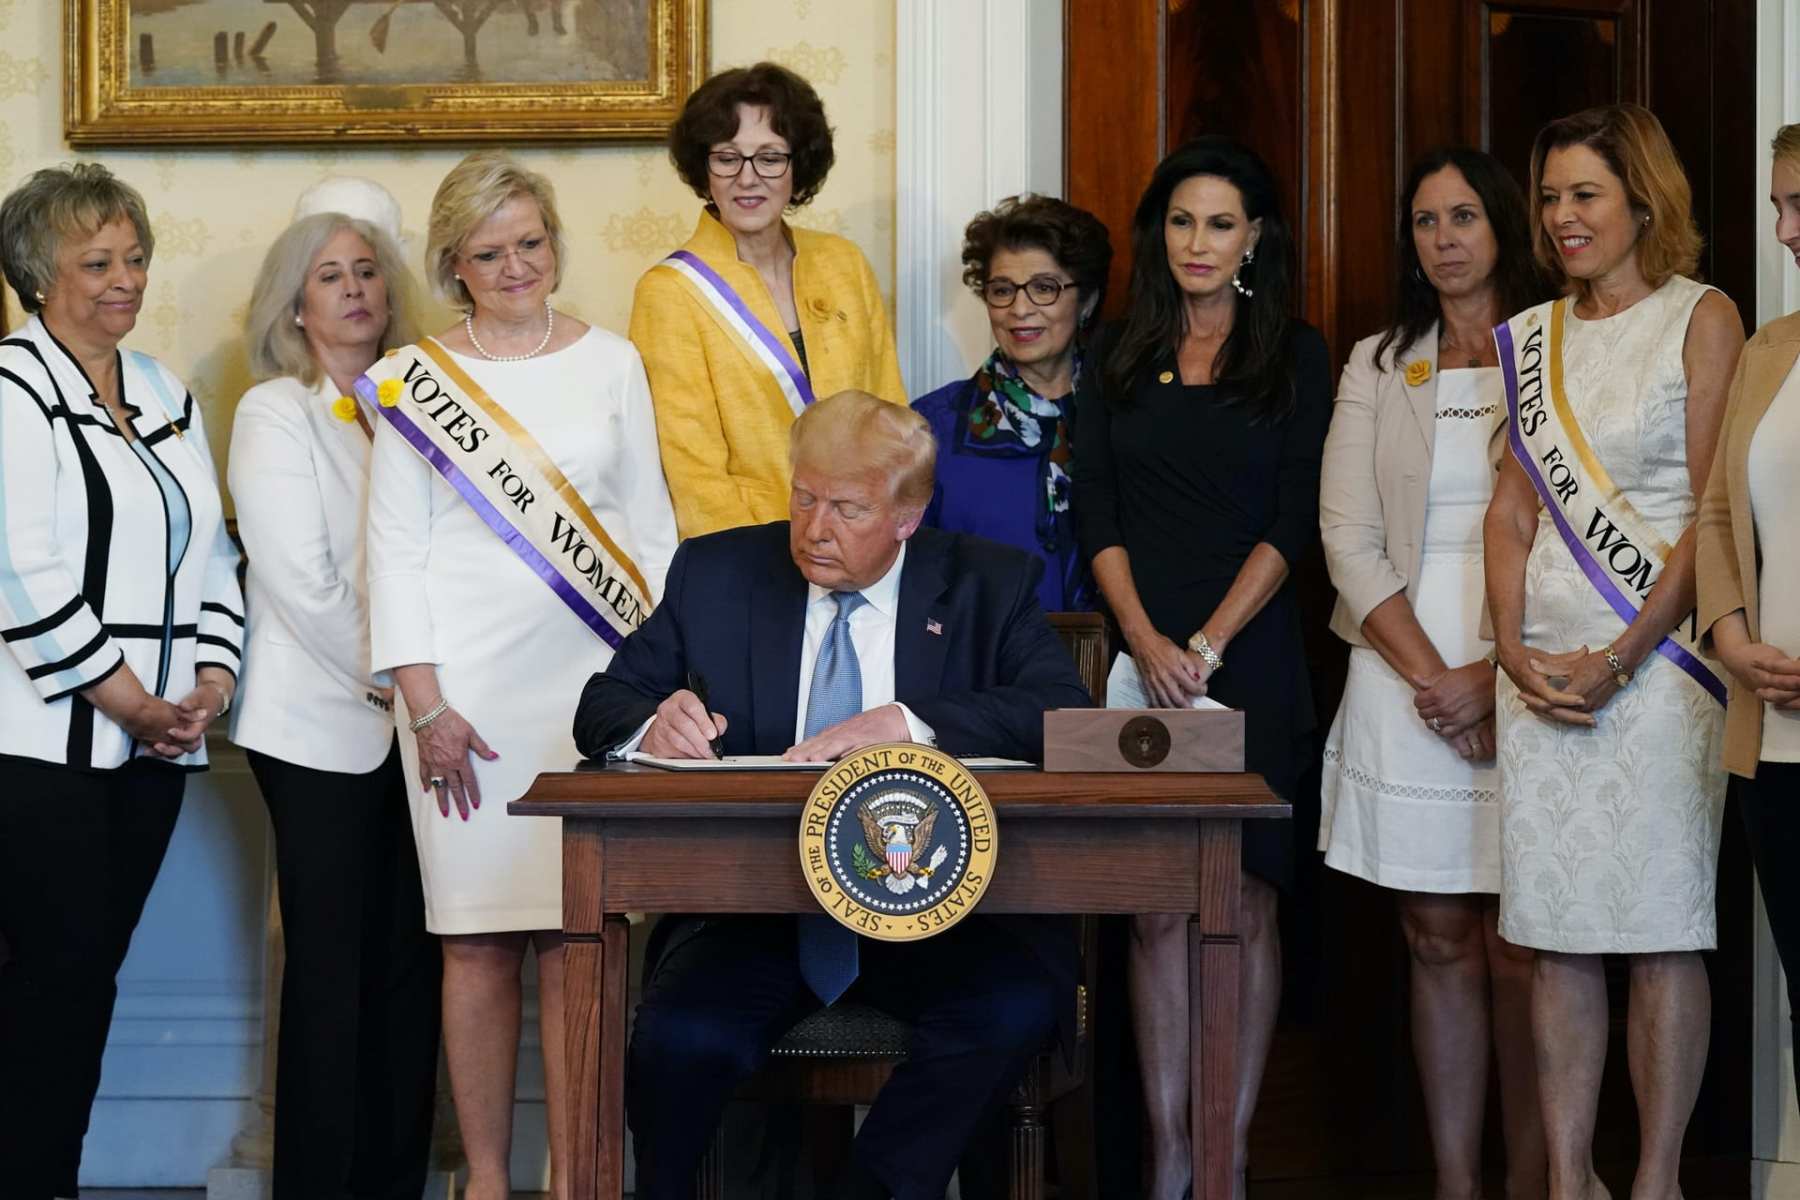 President Donald Trump signs a document surrounded by women surrogates.